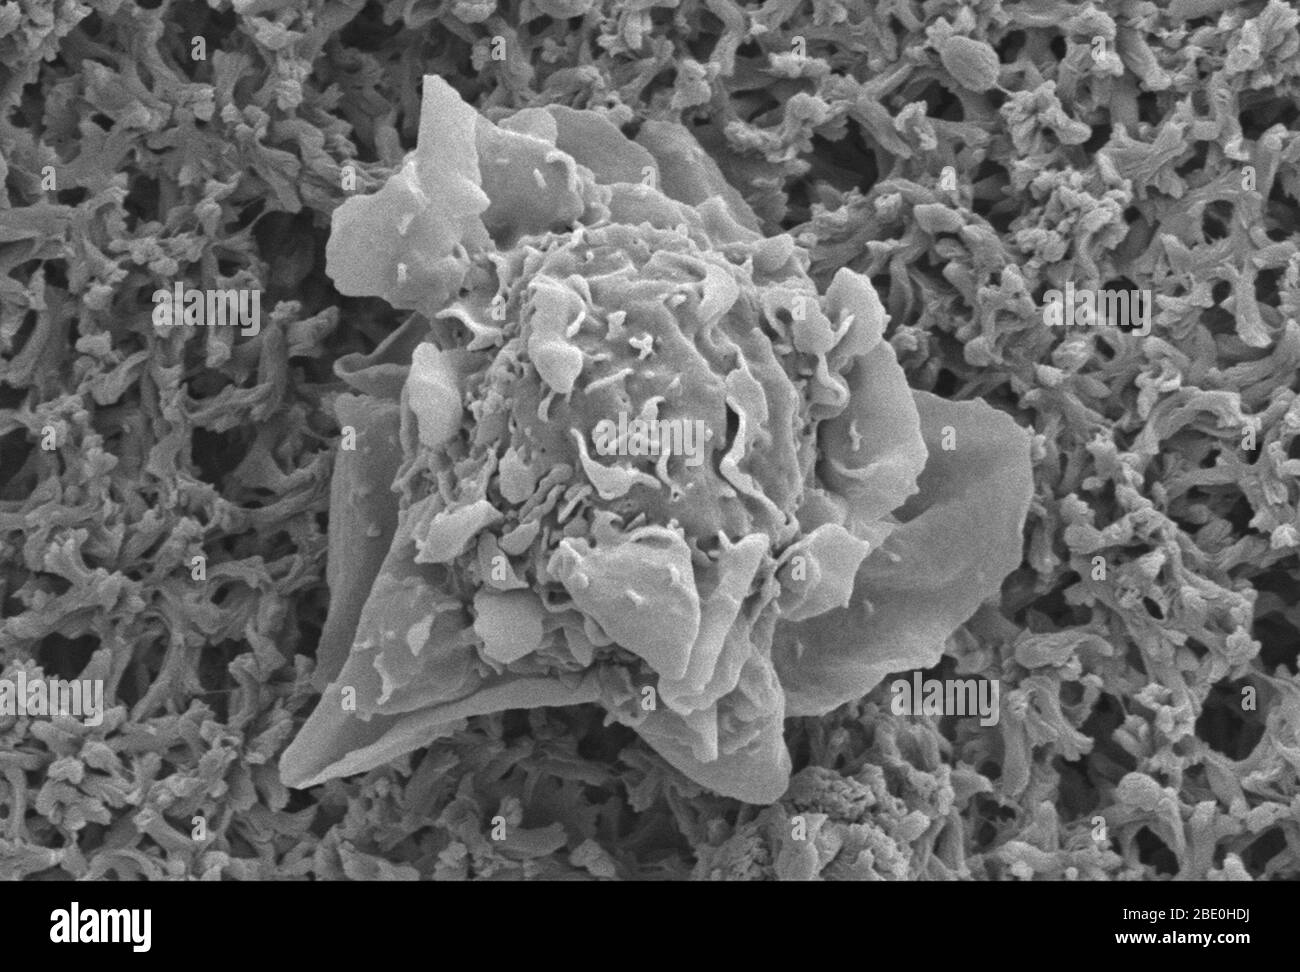 Scanning Electron Micrograph (SEM) showing an immature dendritic cell. Dendritic cells (DCs) are antigen-presenting cells (accessory cells) of the mammalian immune system. Their main function is to process antigen material and present it on the cell surface to the T cells of the immune system. They act as messengers between the innate and the adaptive immune systems. Dendritic cells are present in those tissues that are in contact with the external environment, such as the skin and the inner lining of the nose, lungs, stomach and intestines. They can also be found in an immature state in the b Stock Photo